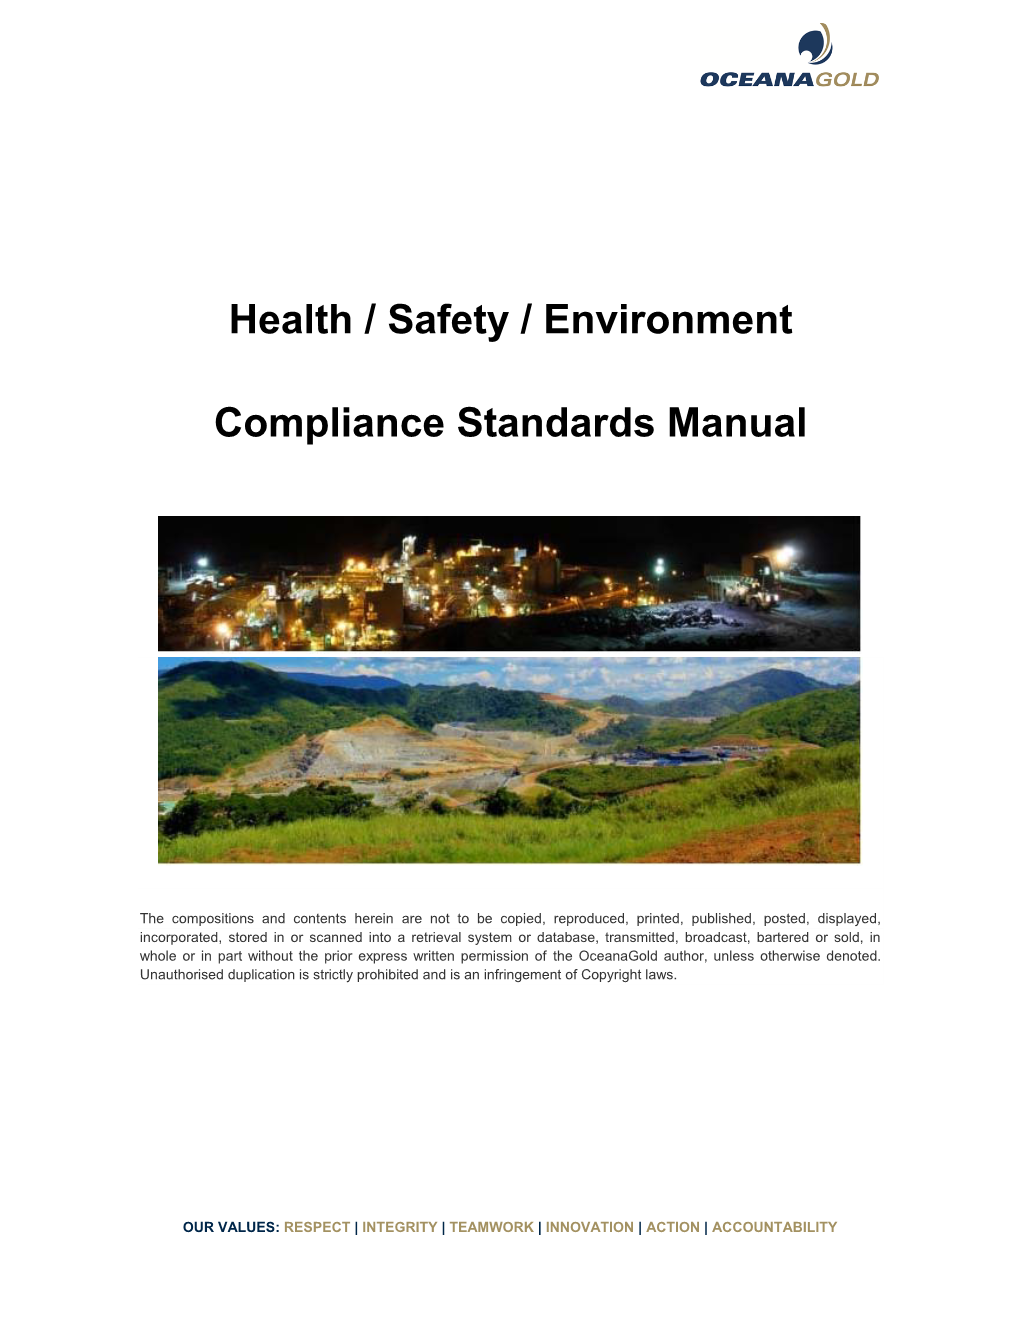 Health / Safety / Environment Compliance Standards Manual